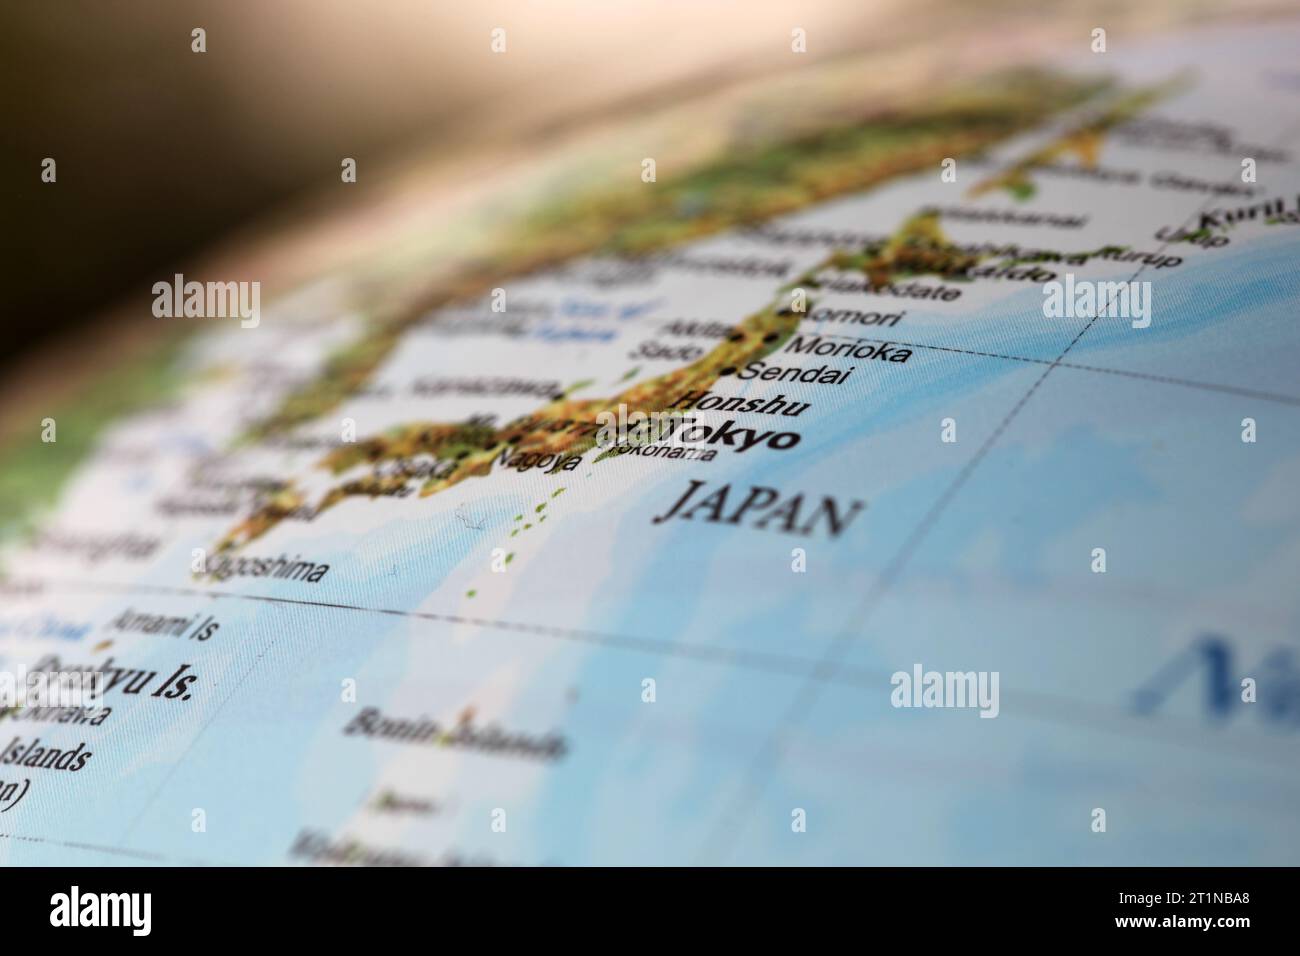 Tokyo Japan on a world globe. Deliberate Shallow depth of field Stock Photo